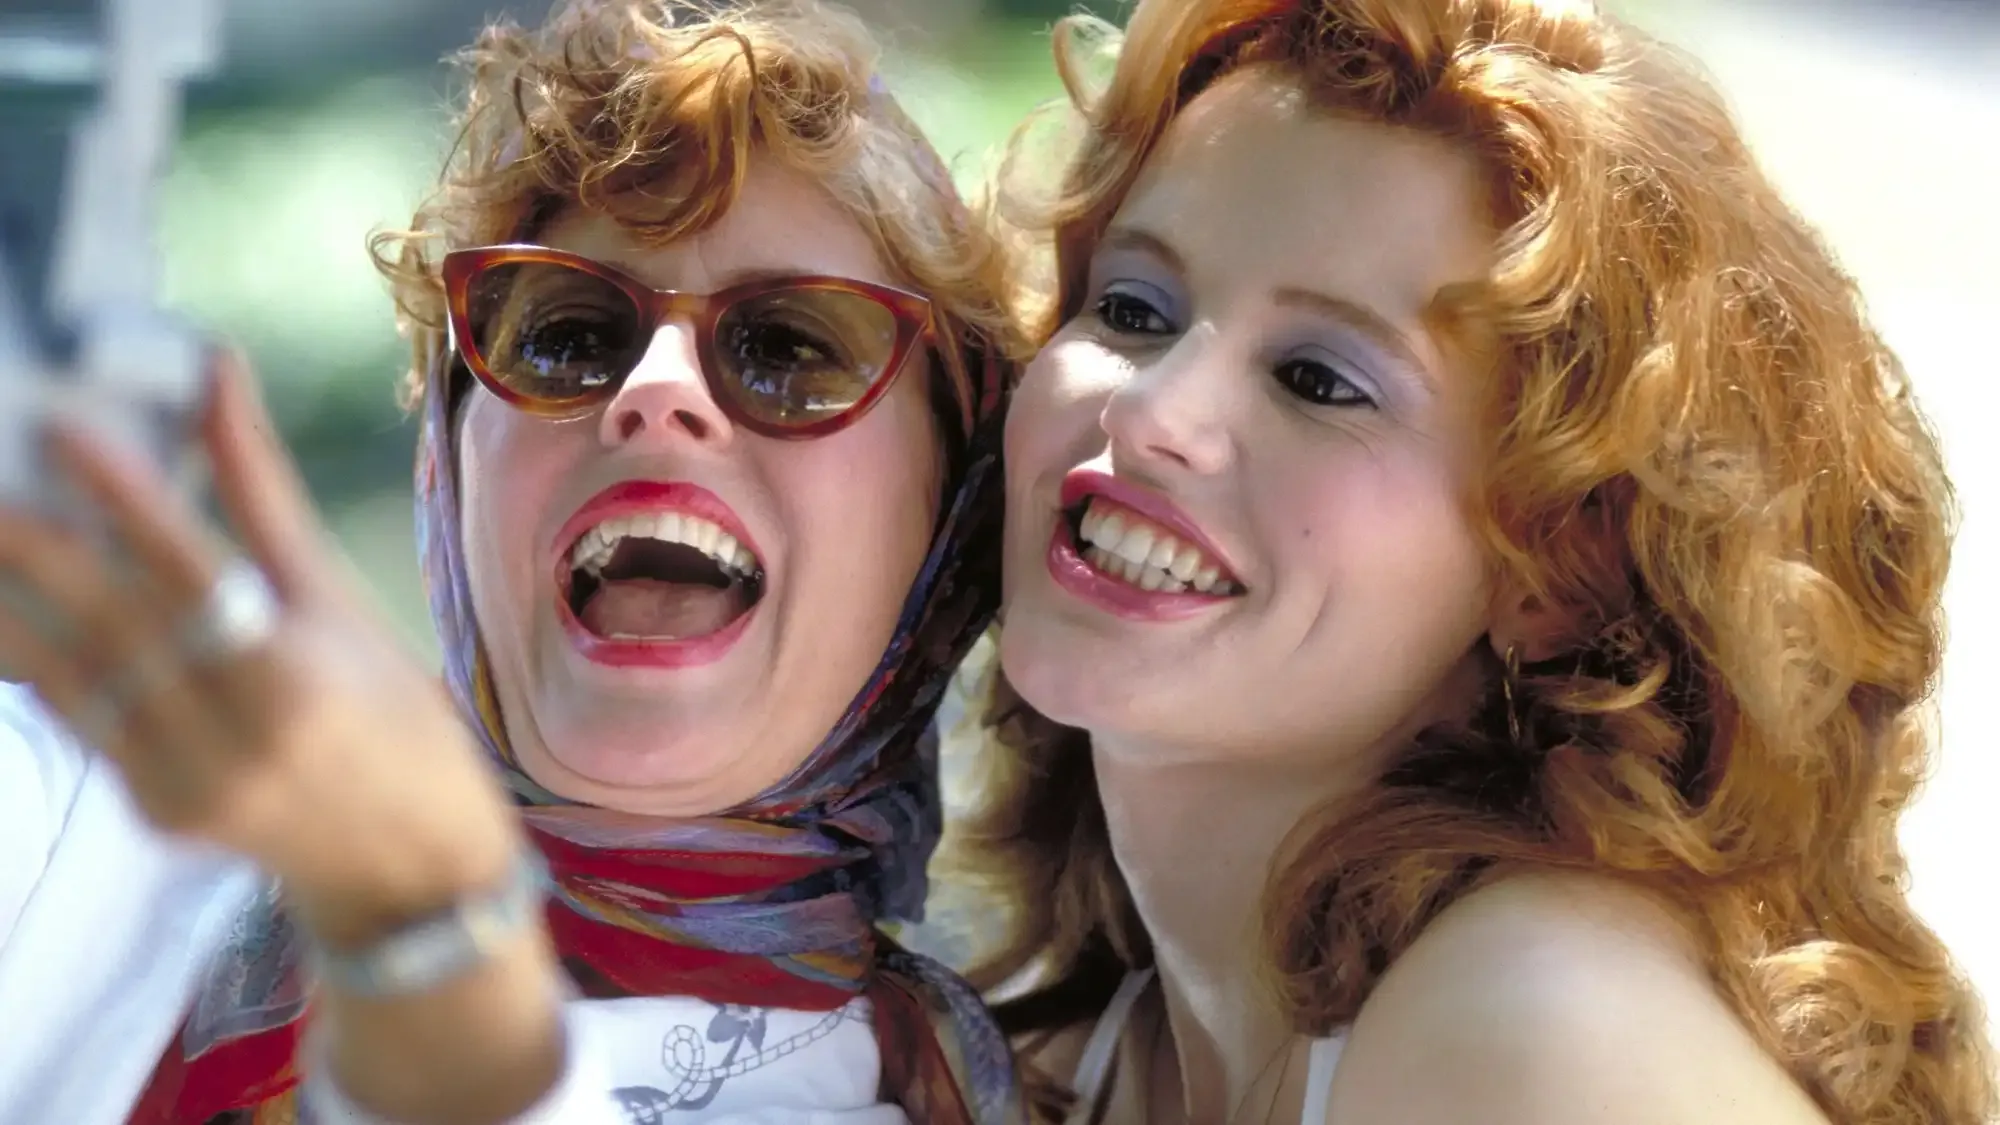 Thelma & Louise movie review